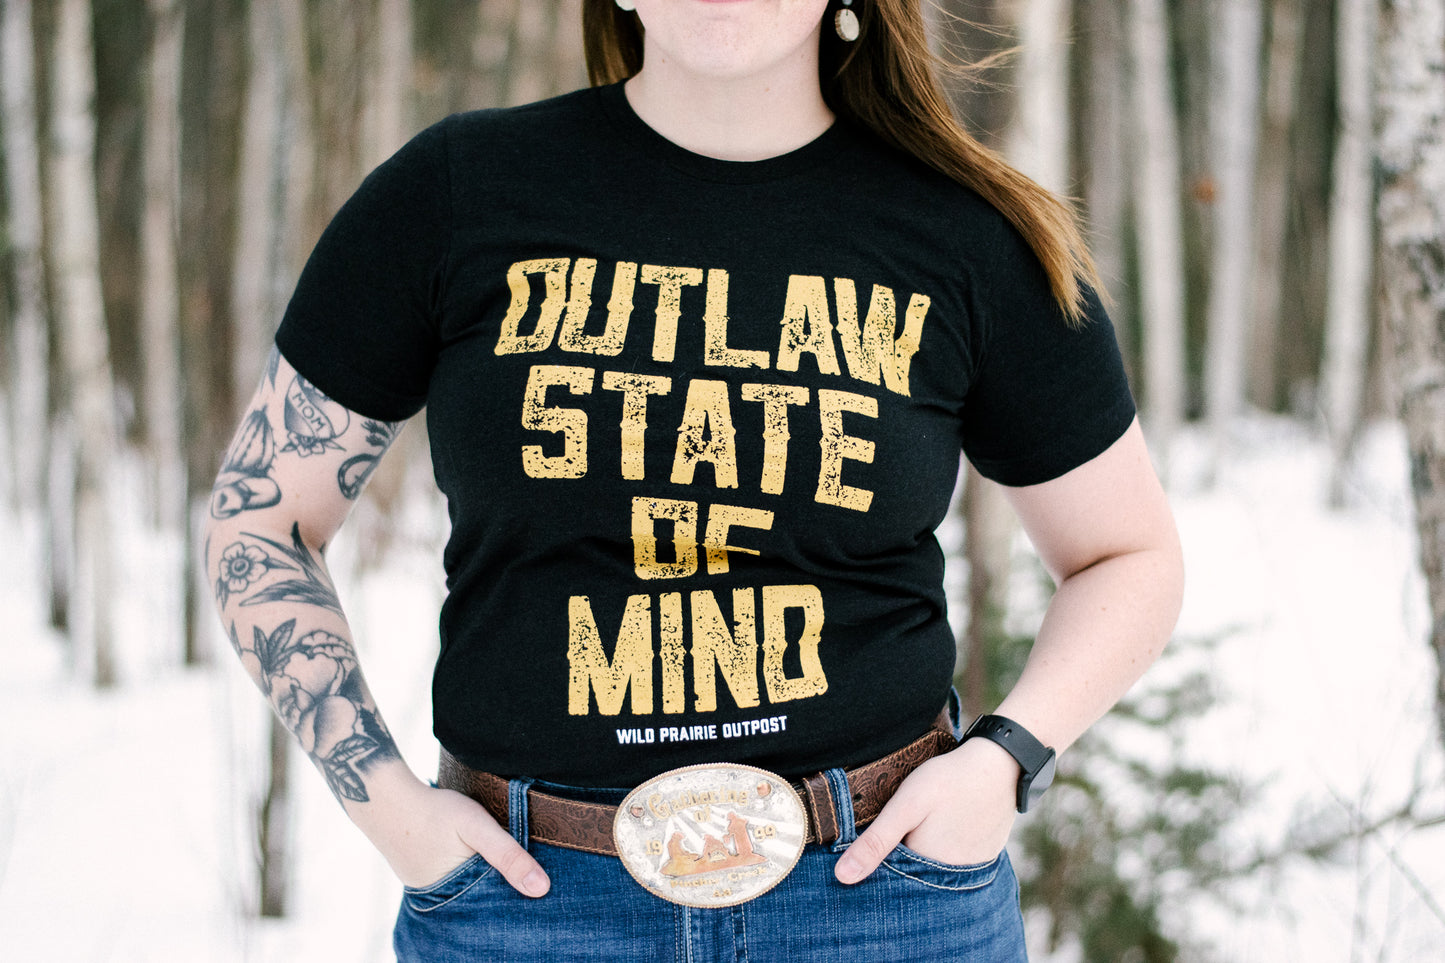 Outlaw State of Mind Tee